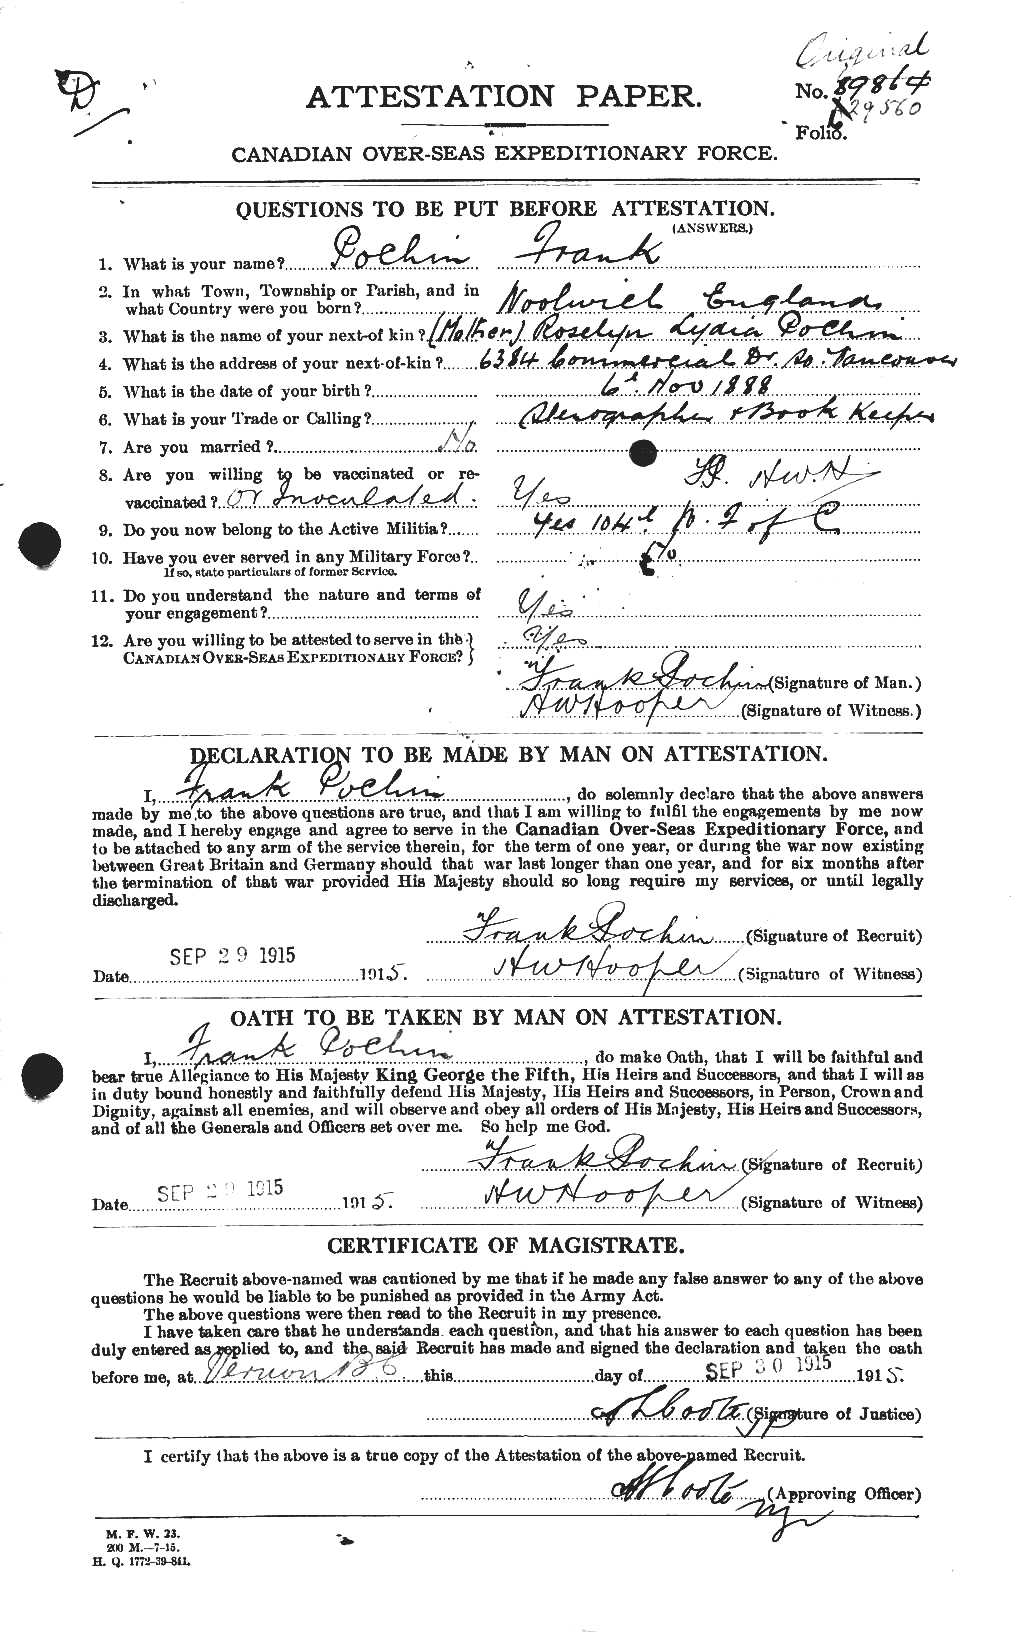 Personnel Records of the First World War - CEF 578689a